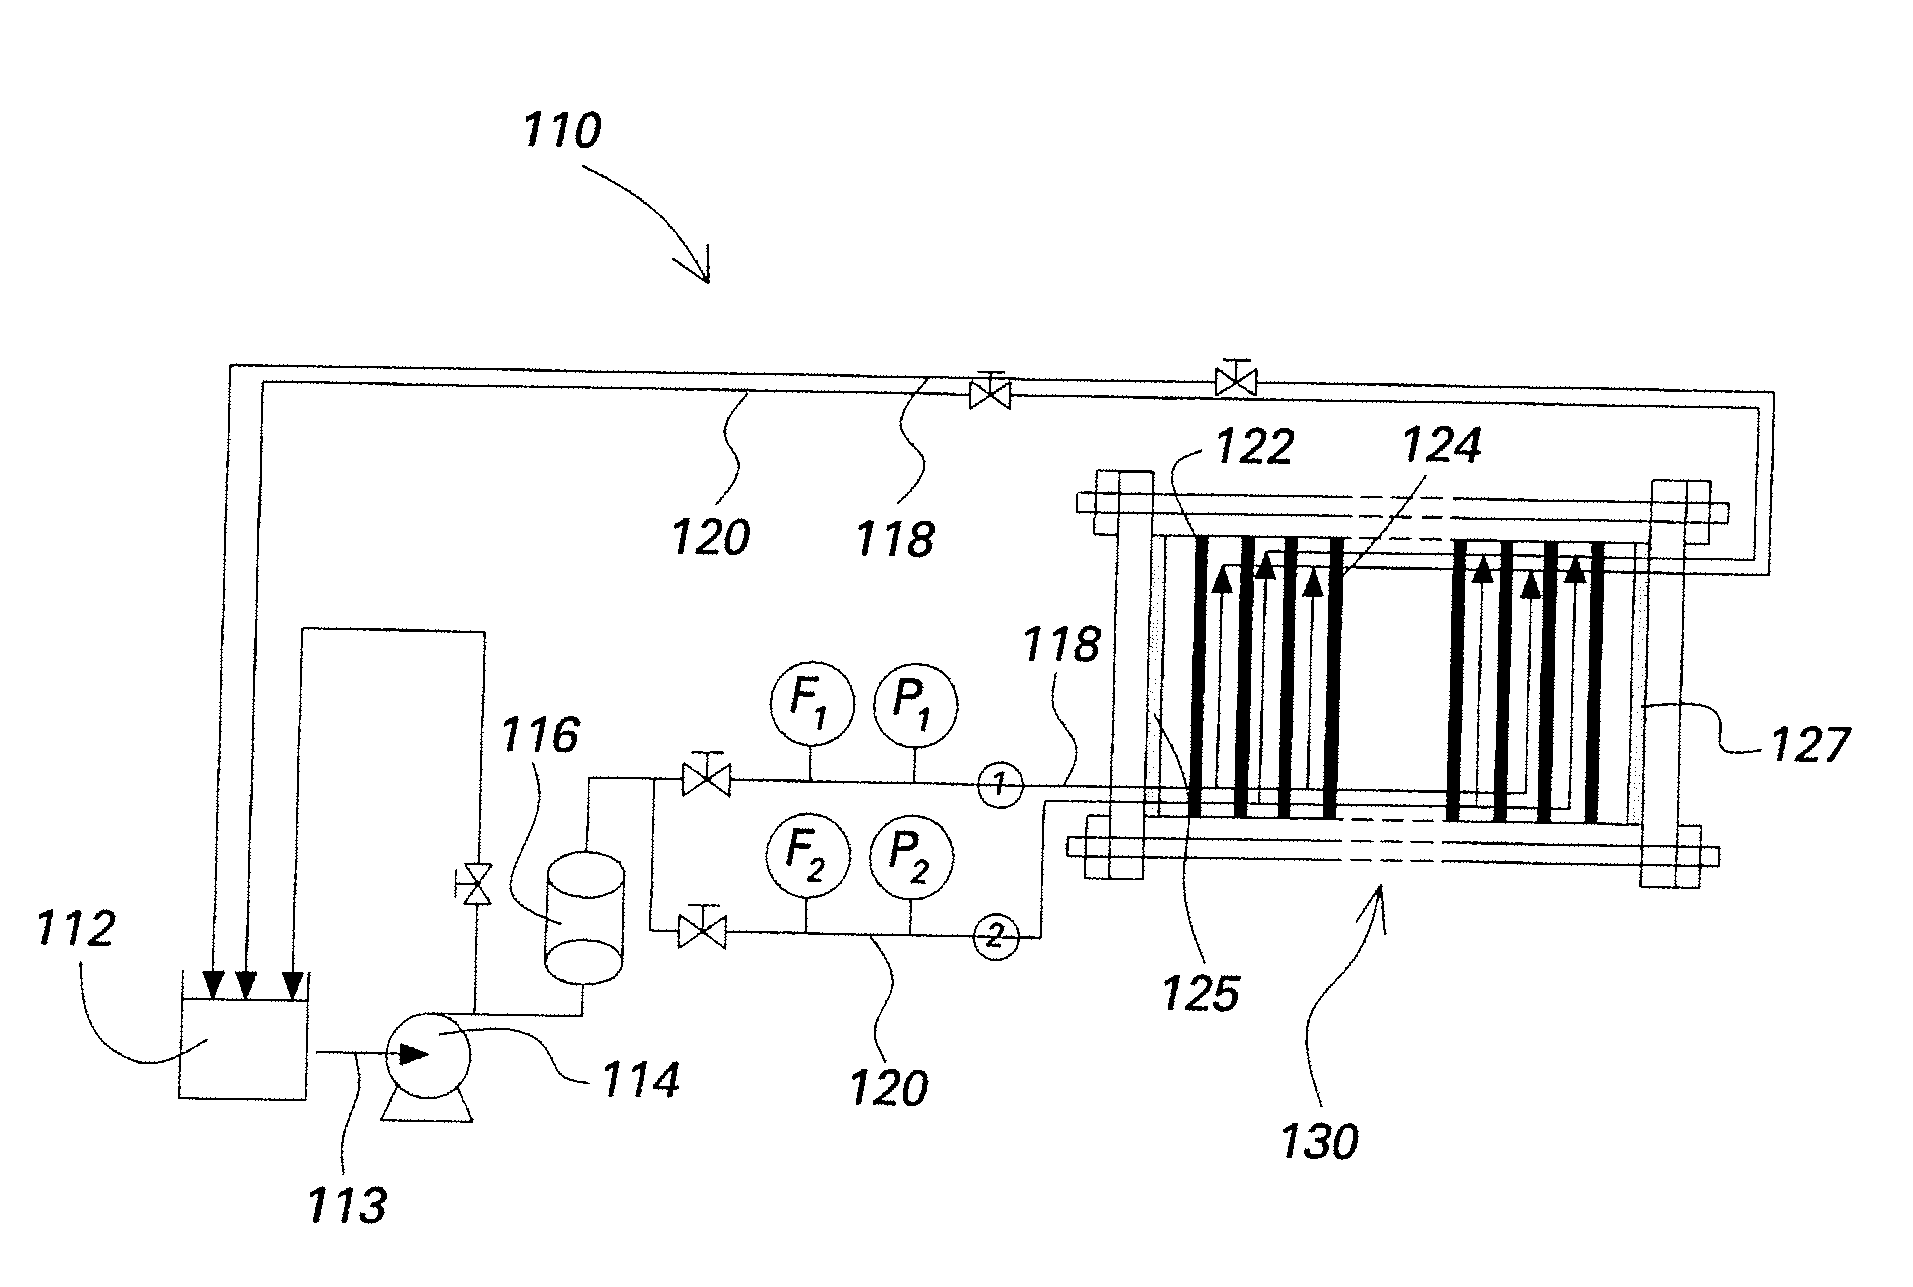 Non-faraday based systems, devices and methods for removing ionic species from liquid